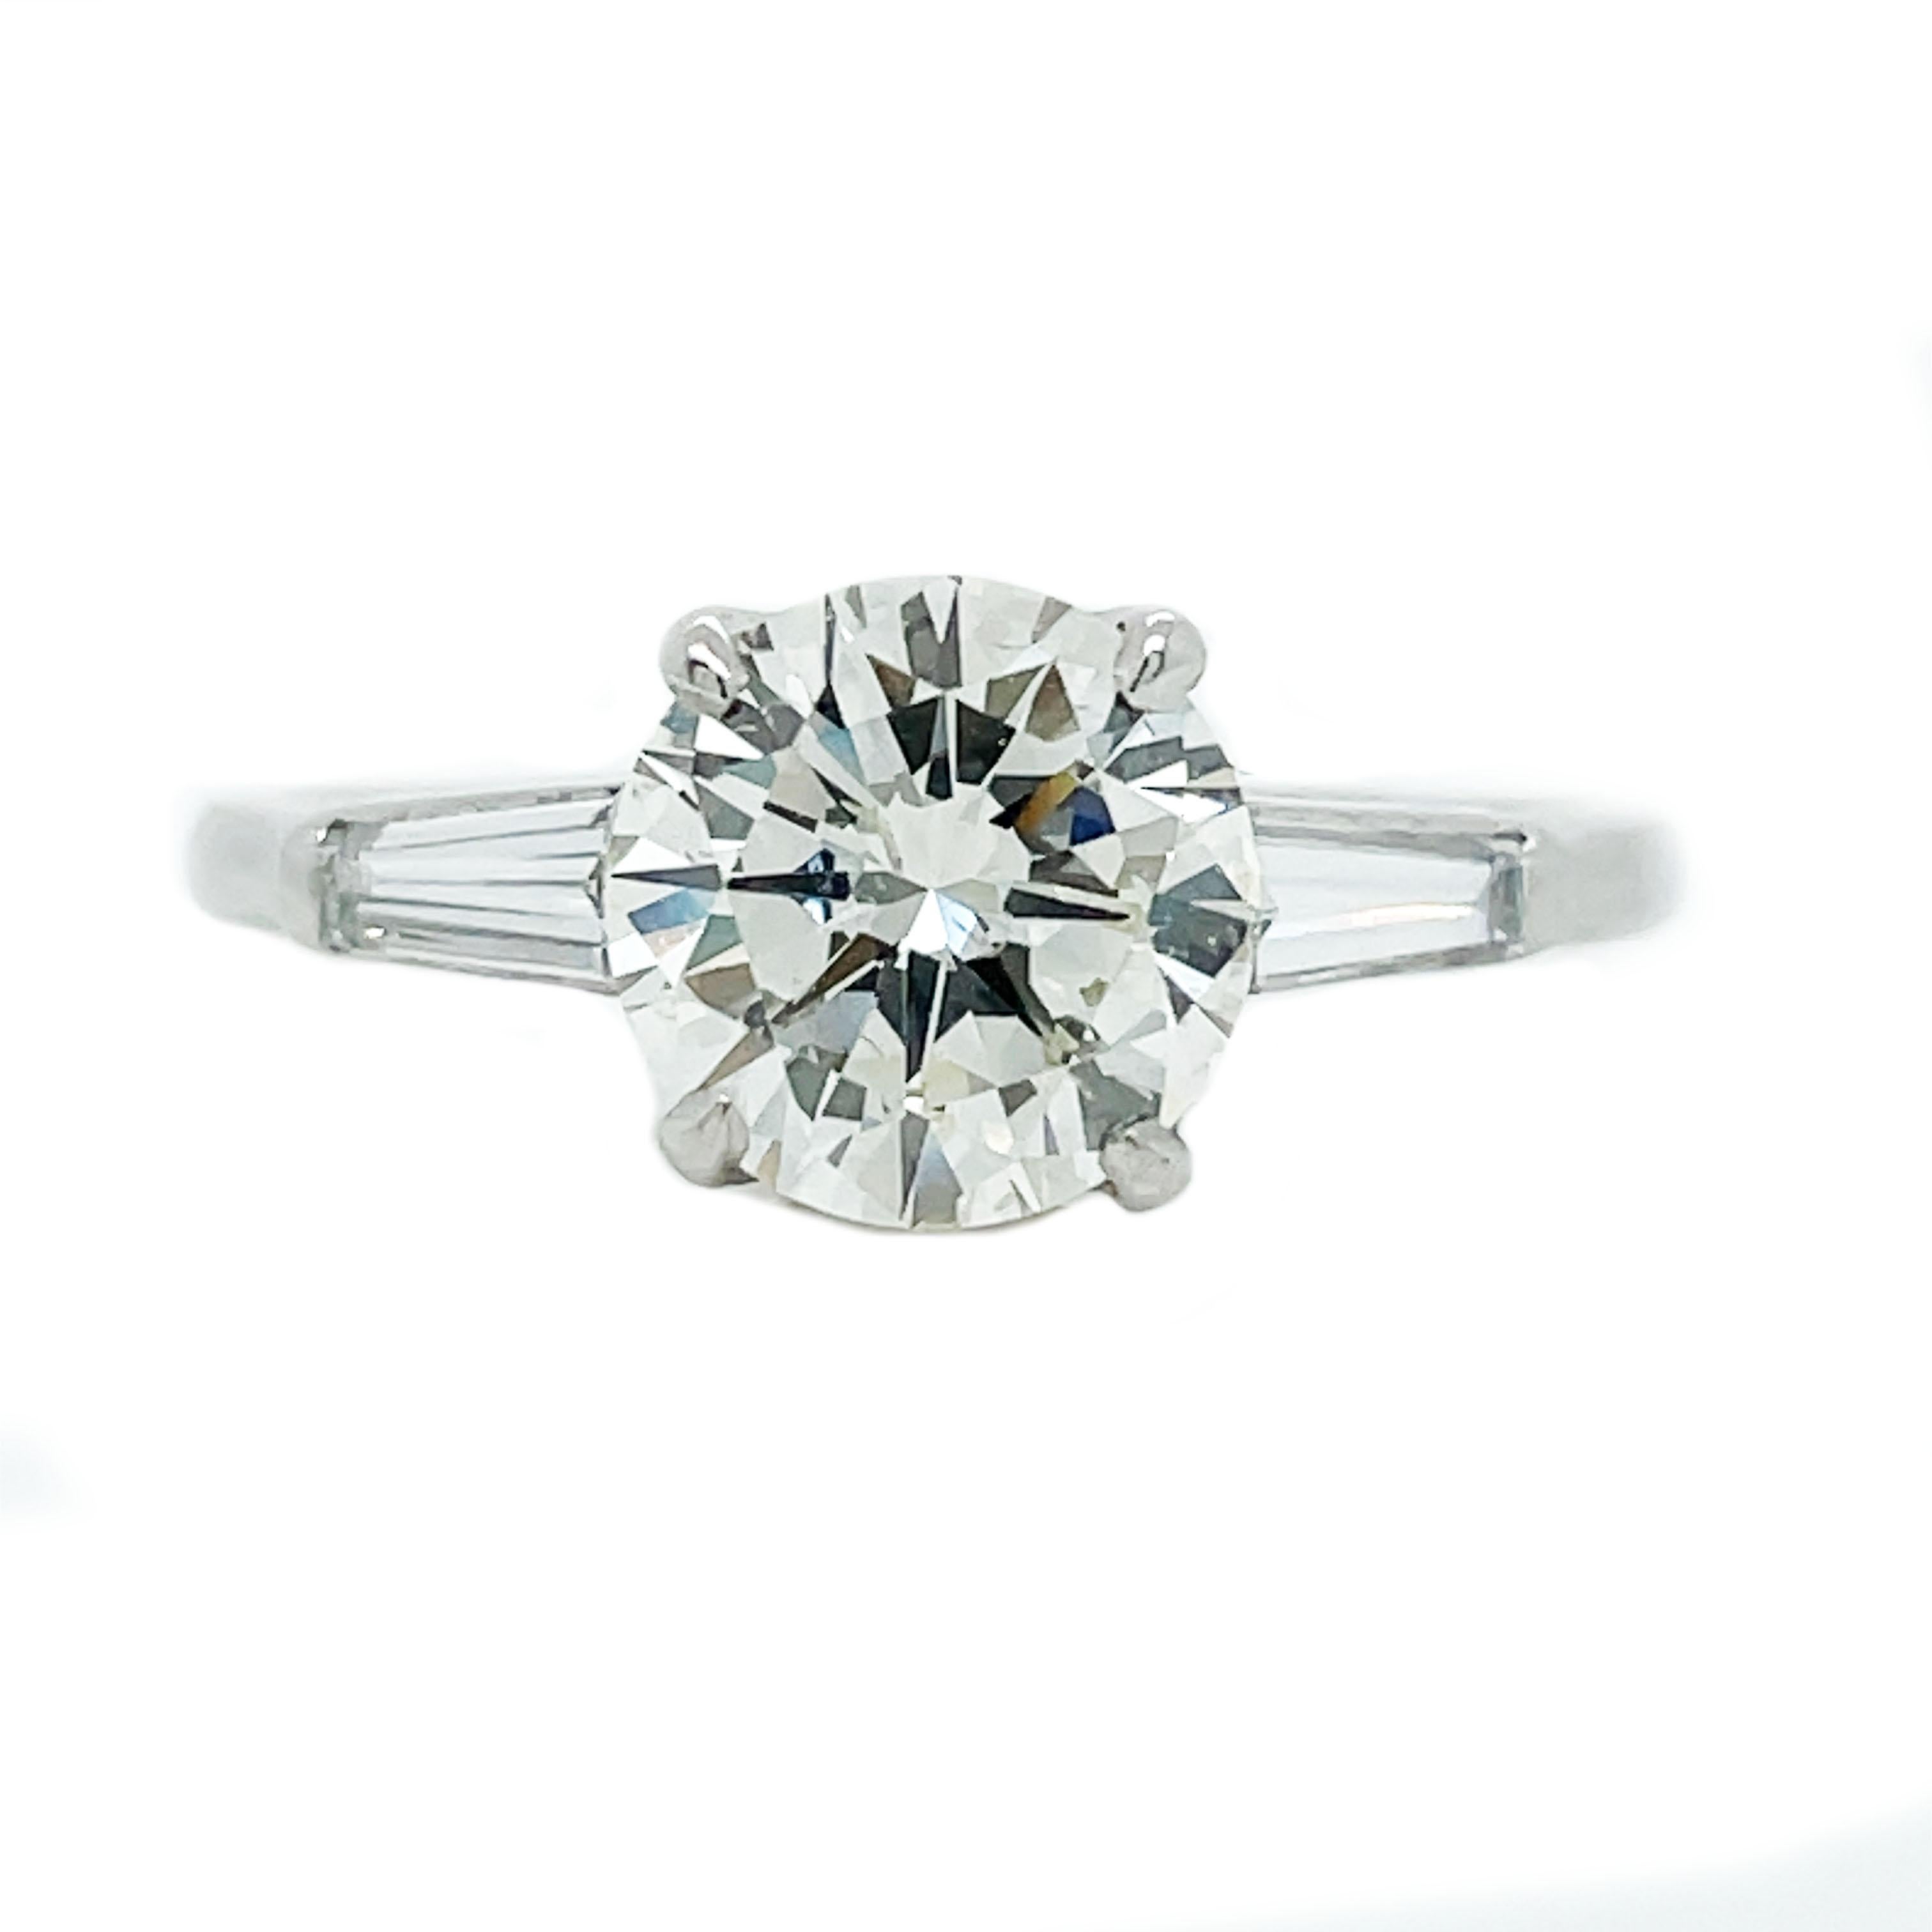 This is an absolutely killer platinum engagement ring showcasing a bright and lively center diamond complimented by gorgeous baguette diamonds! A stunning, slightly yellow, and sparkling round diamond, weighing 2.01 carats, is tastefully presented